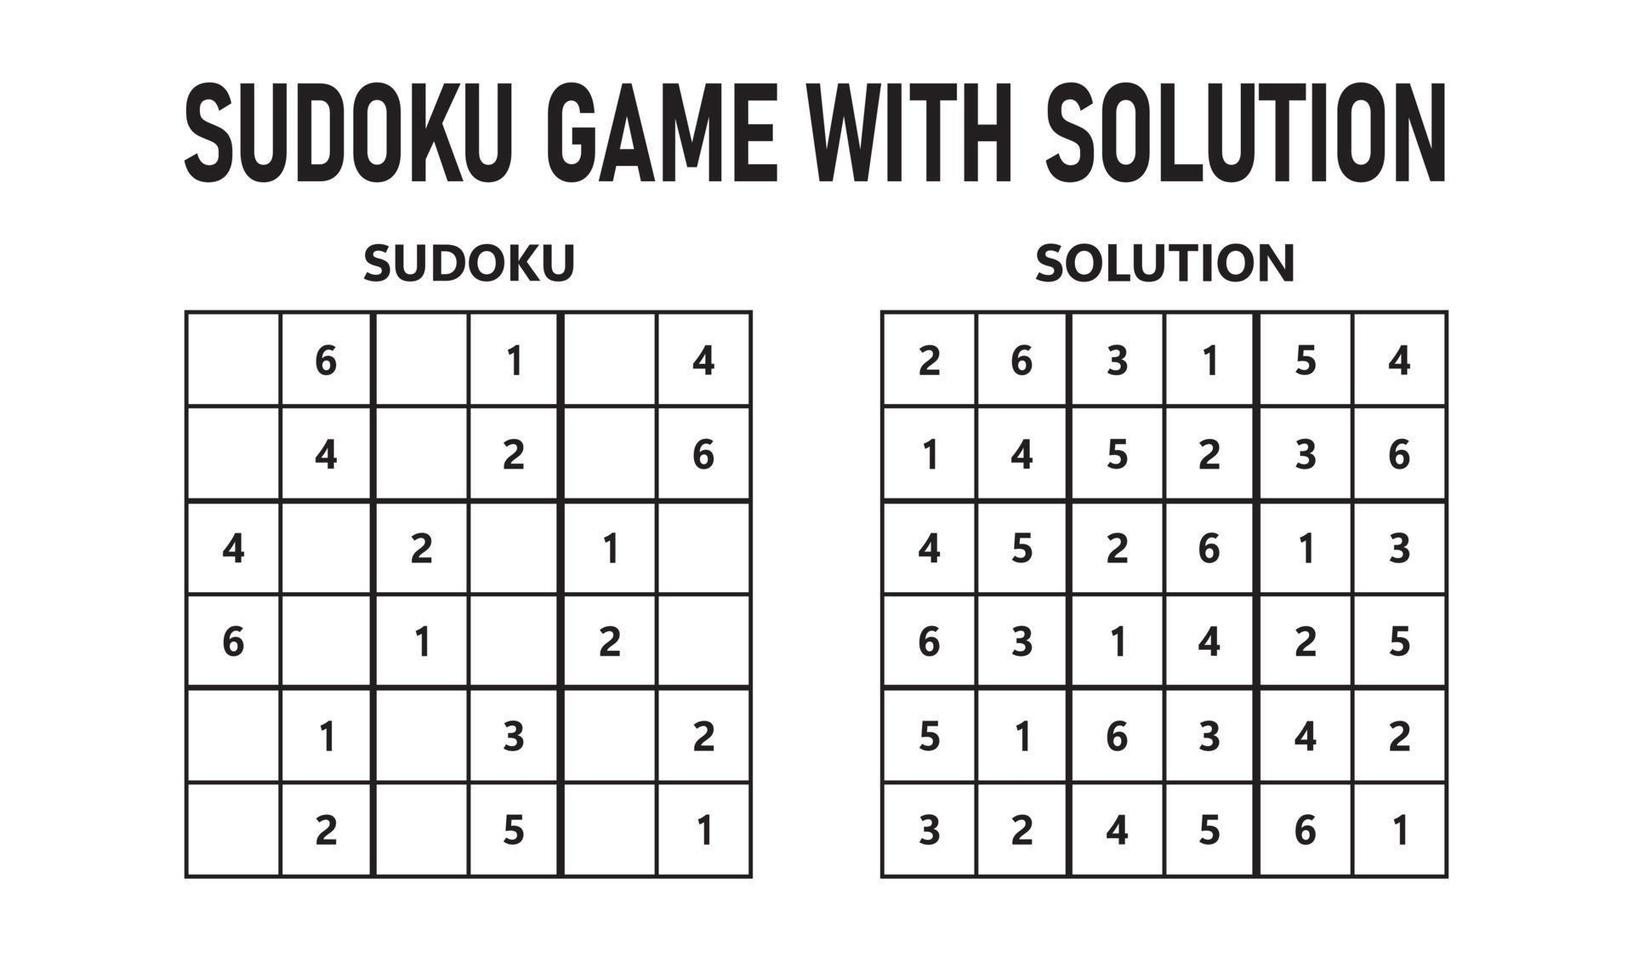 Sudoku game with solution. Sudoku puzzle game with numbers. Can be used as an educational game. Logic puzzle for kids or leisure game for adults. vector